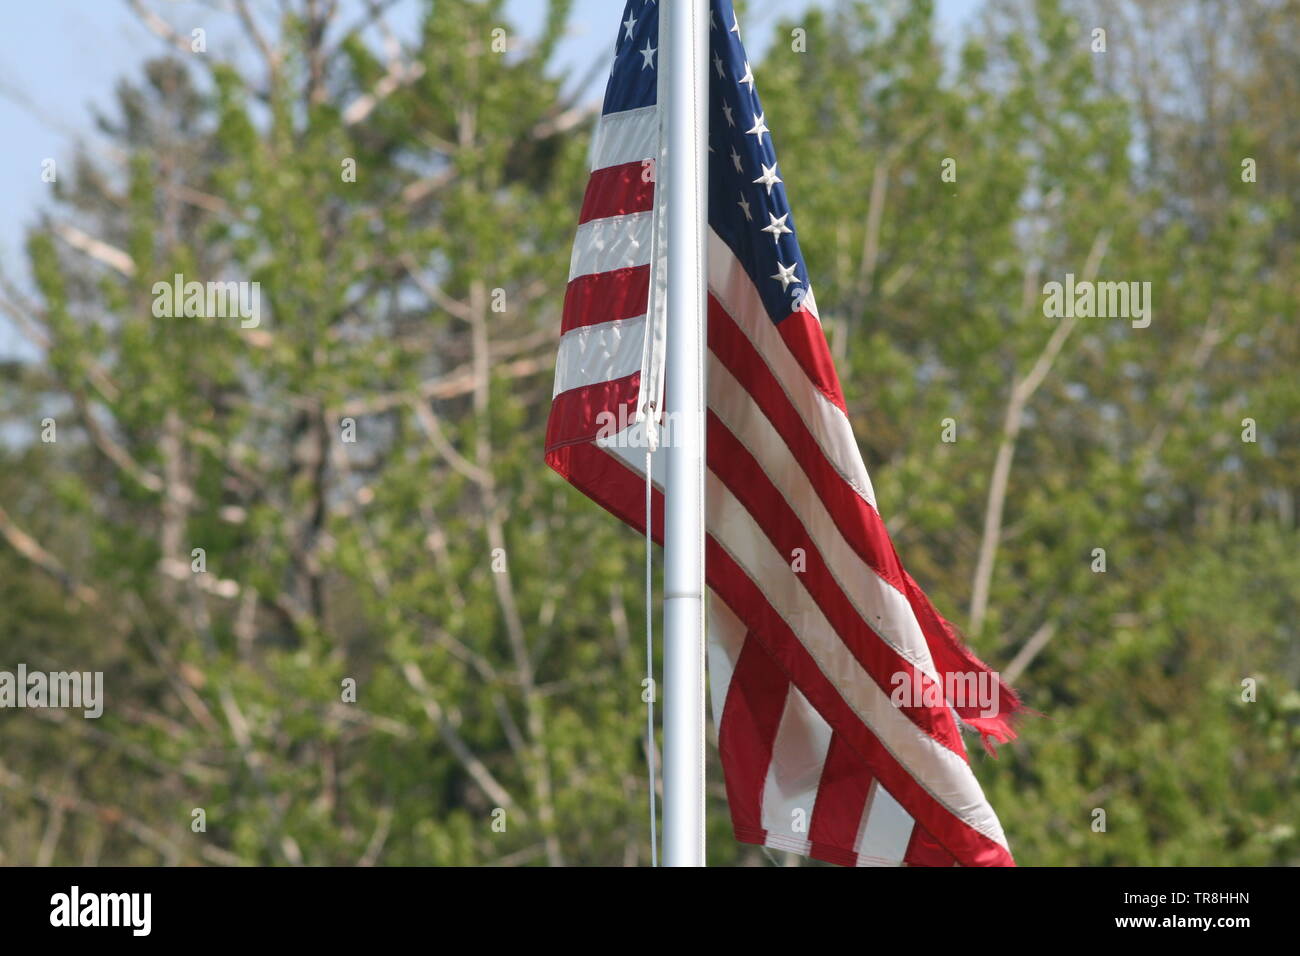 American flag waving on pole with tree in the background, go red white and blue American Flag a waving in the breeze Stock Photo